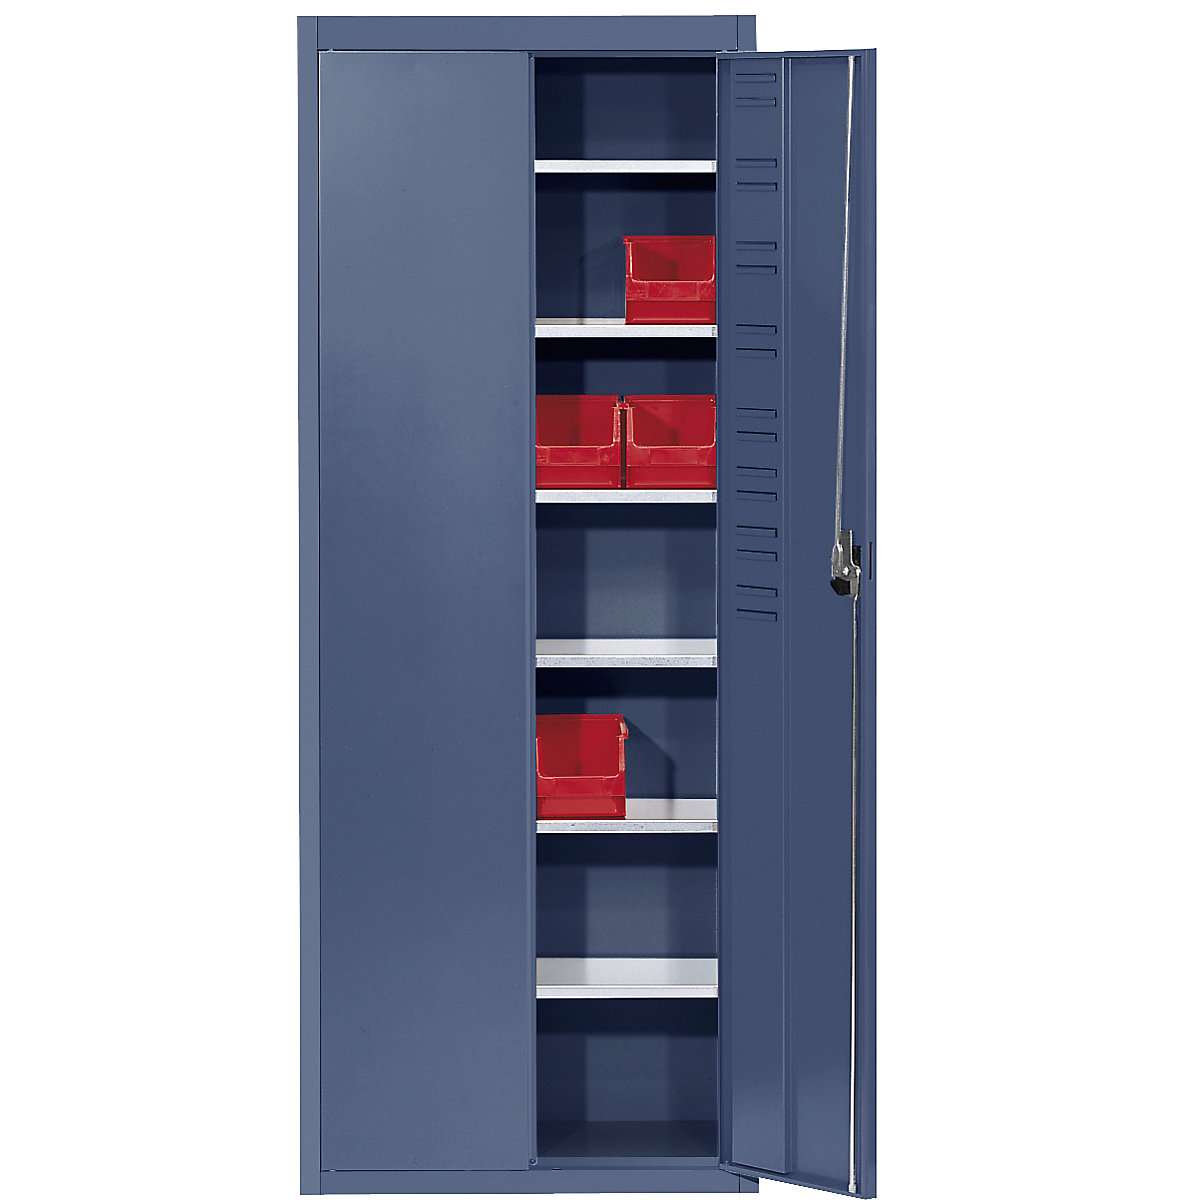 Storage cupboard, without open fronted storage bins – mauser, HxWxD 1740 x 680 x 280 mm, single colour, brilliant blue-8